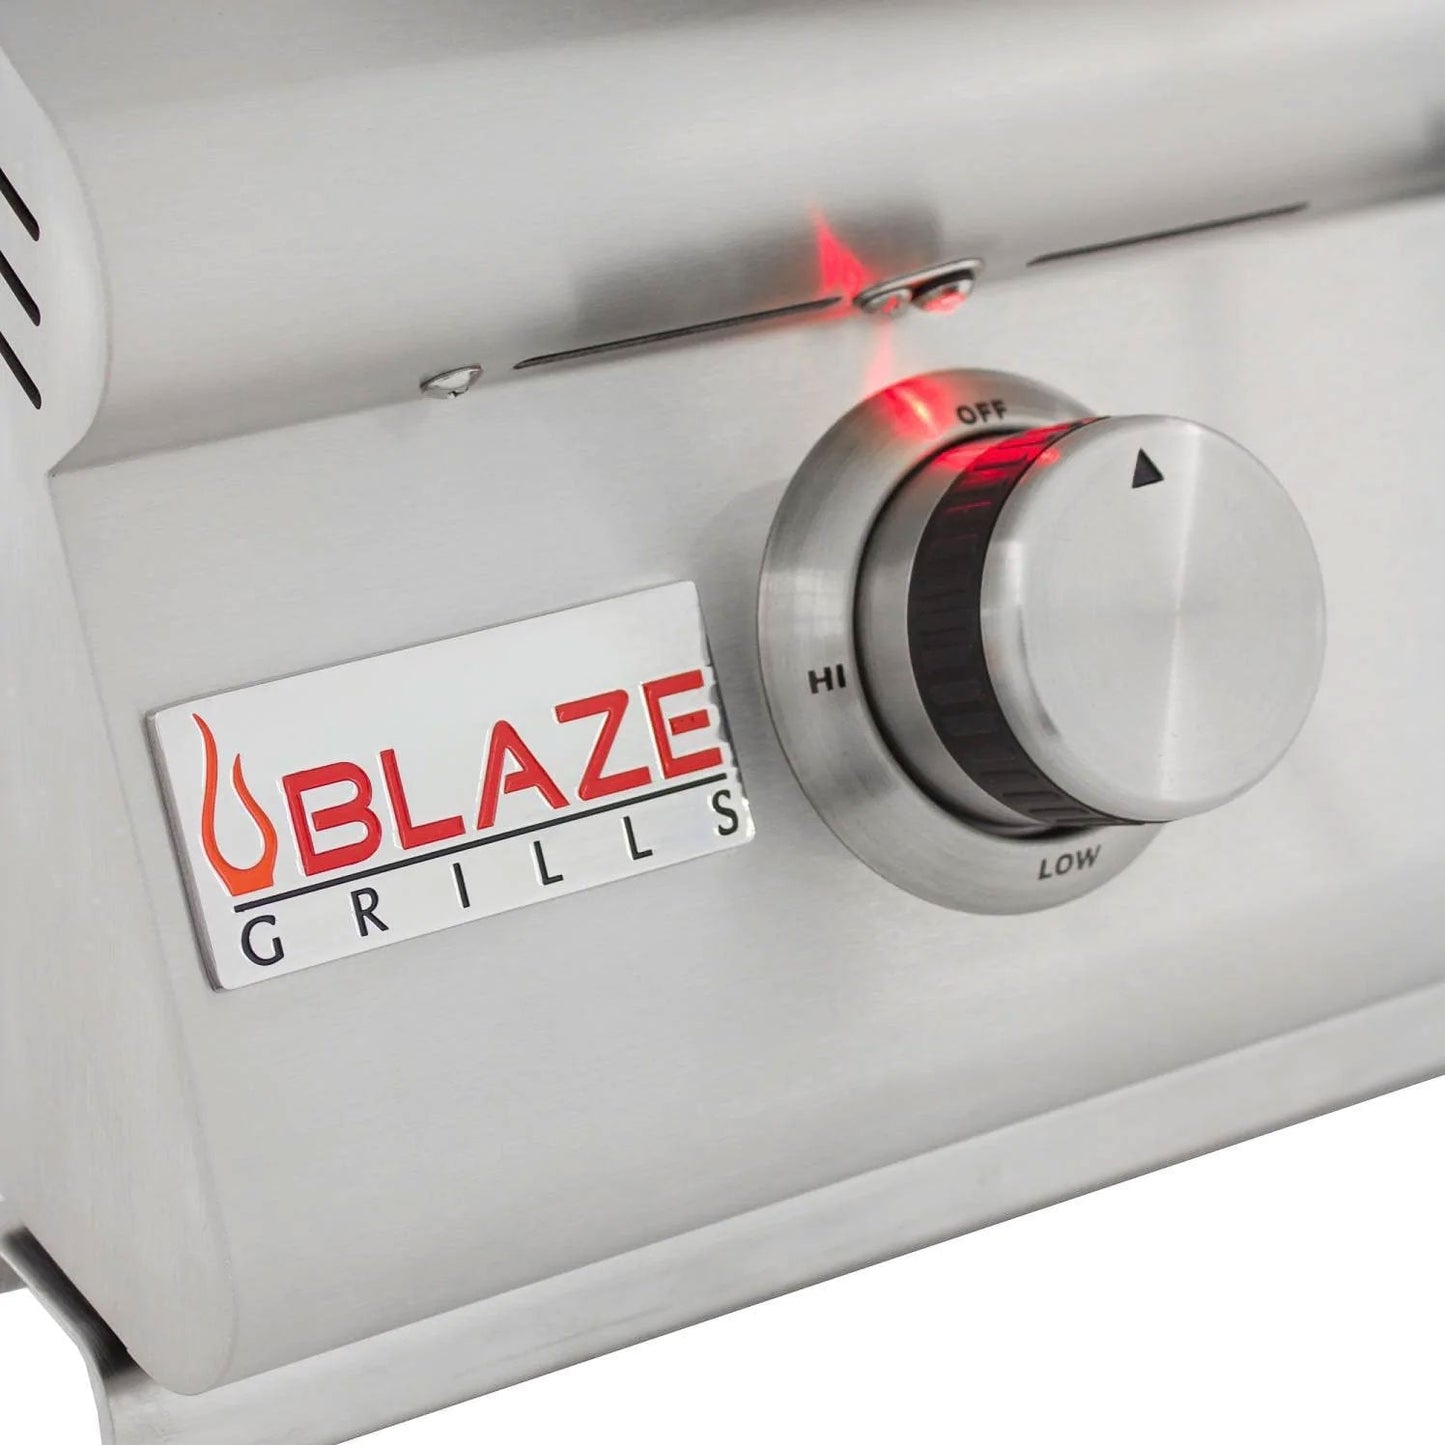 Blaze Premium LTE 40" 5-Burner Gas Grill With Rear Infrared Burners